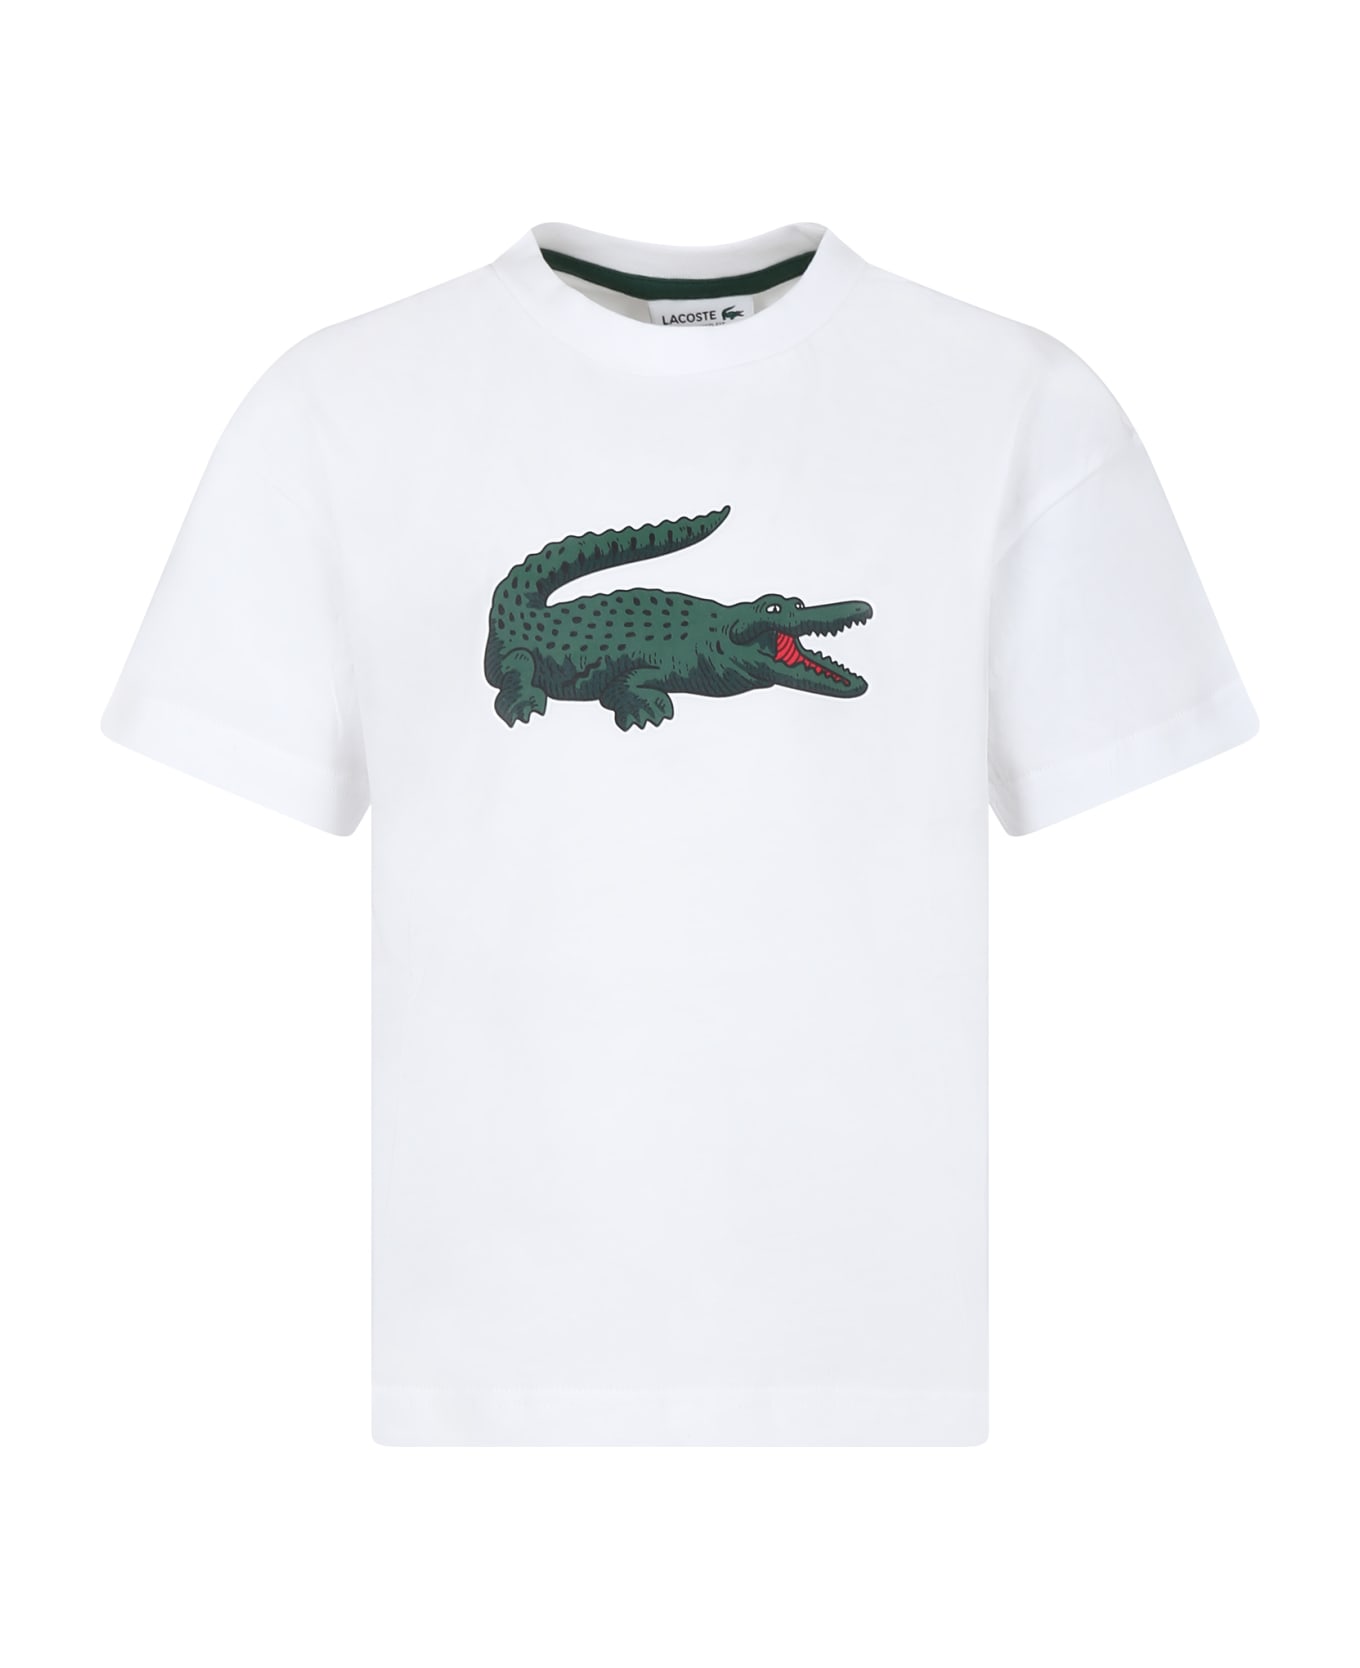 Lacoste White T-shirt For Boy With Crocodile - White